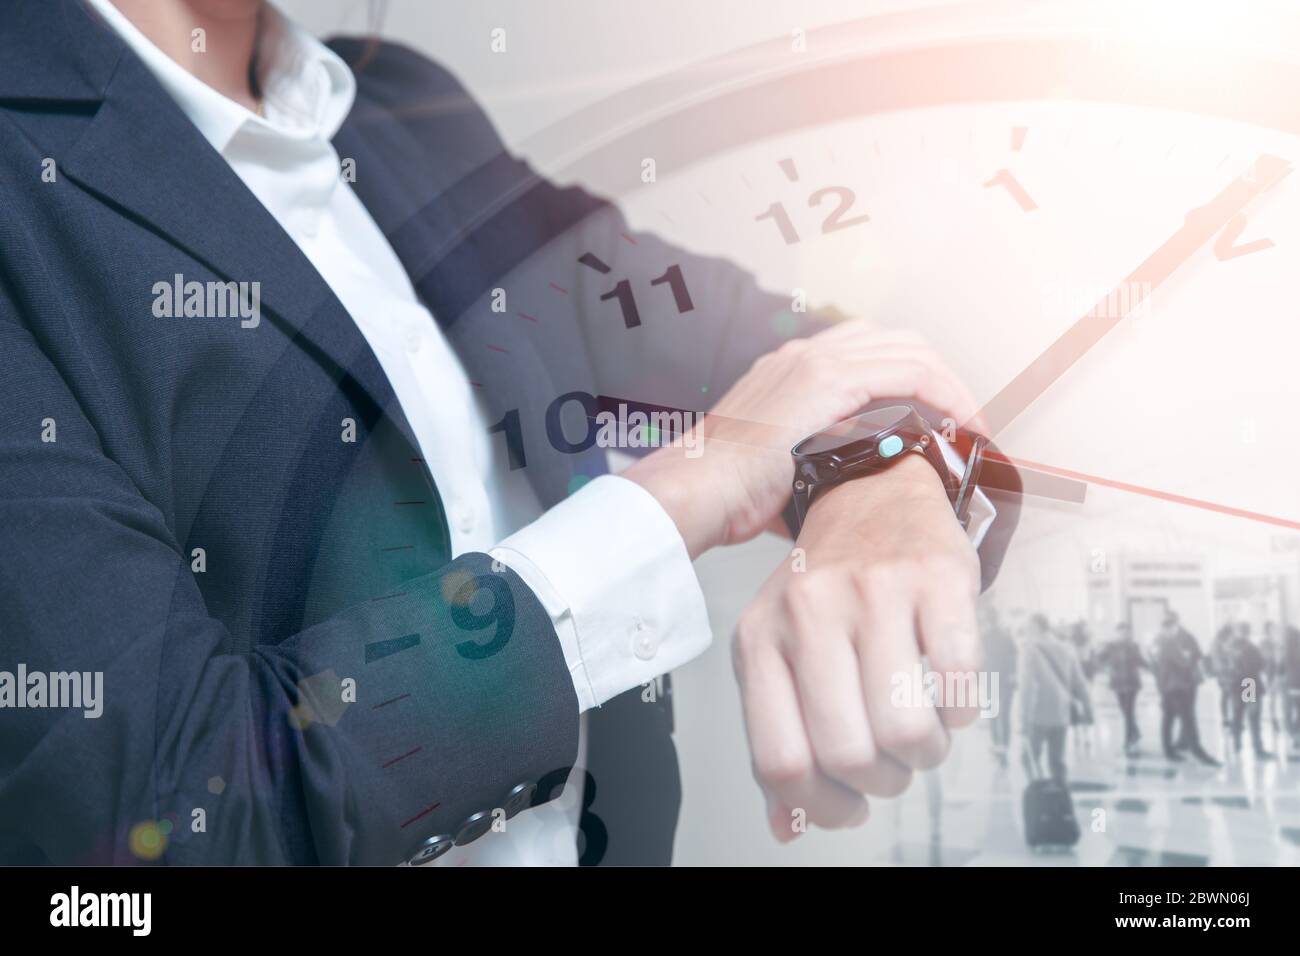 Business times, People looking at wristwatch overlay with time clock face for smart working hours or time schedule concept. Stock Photo